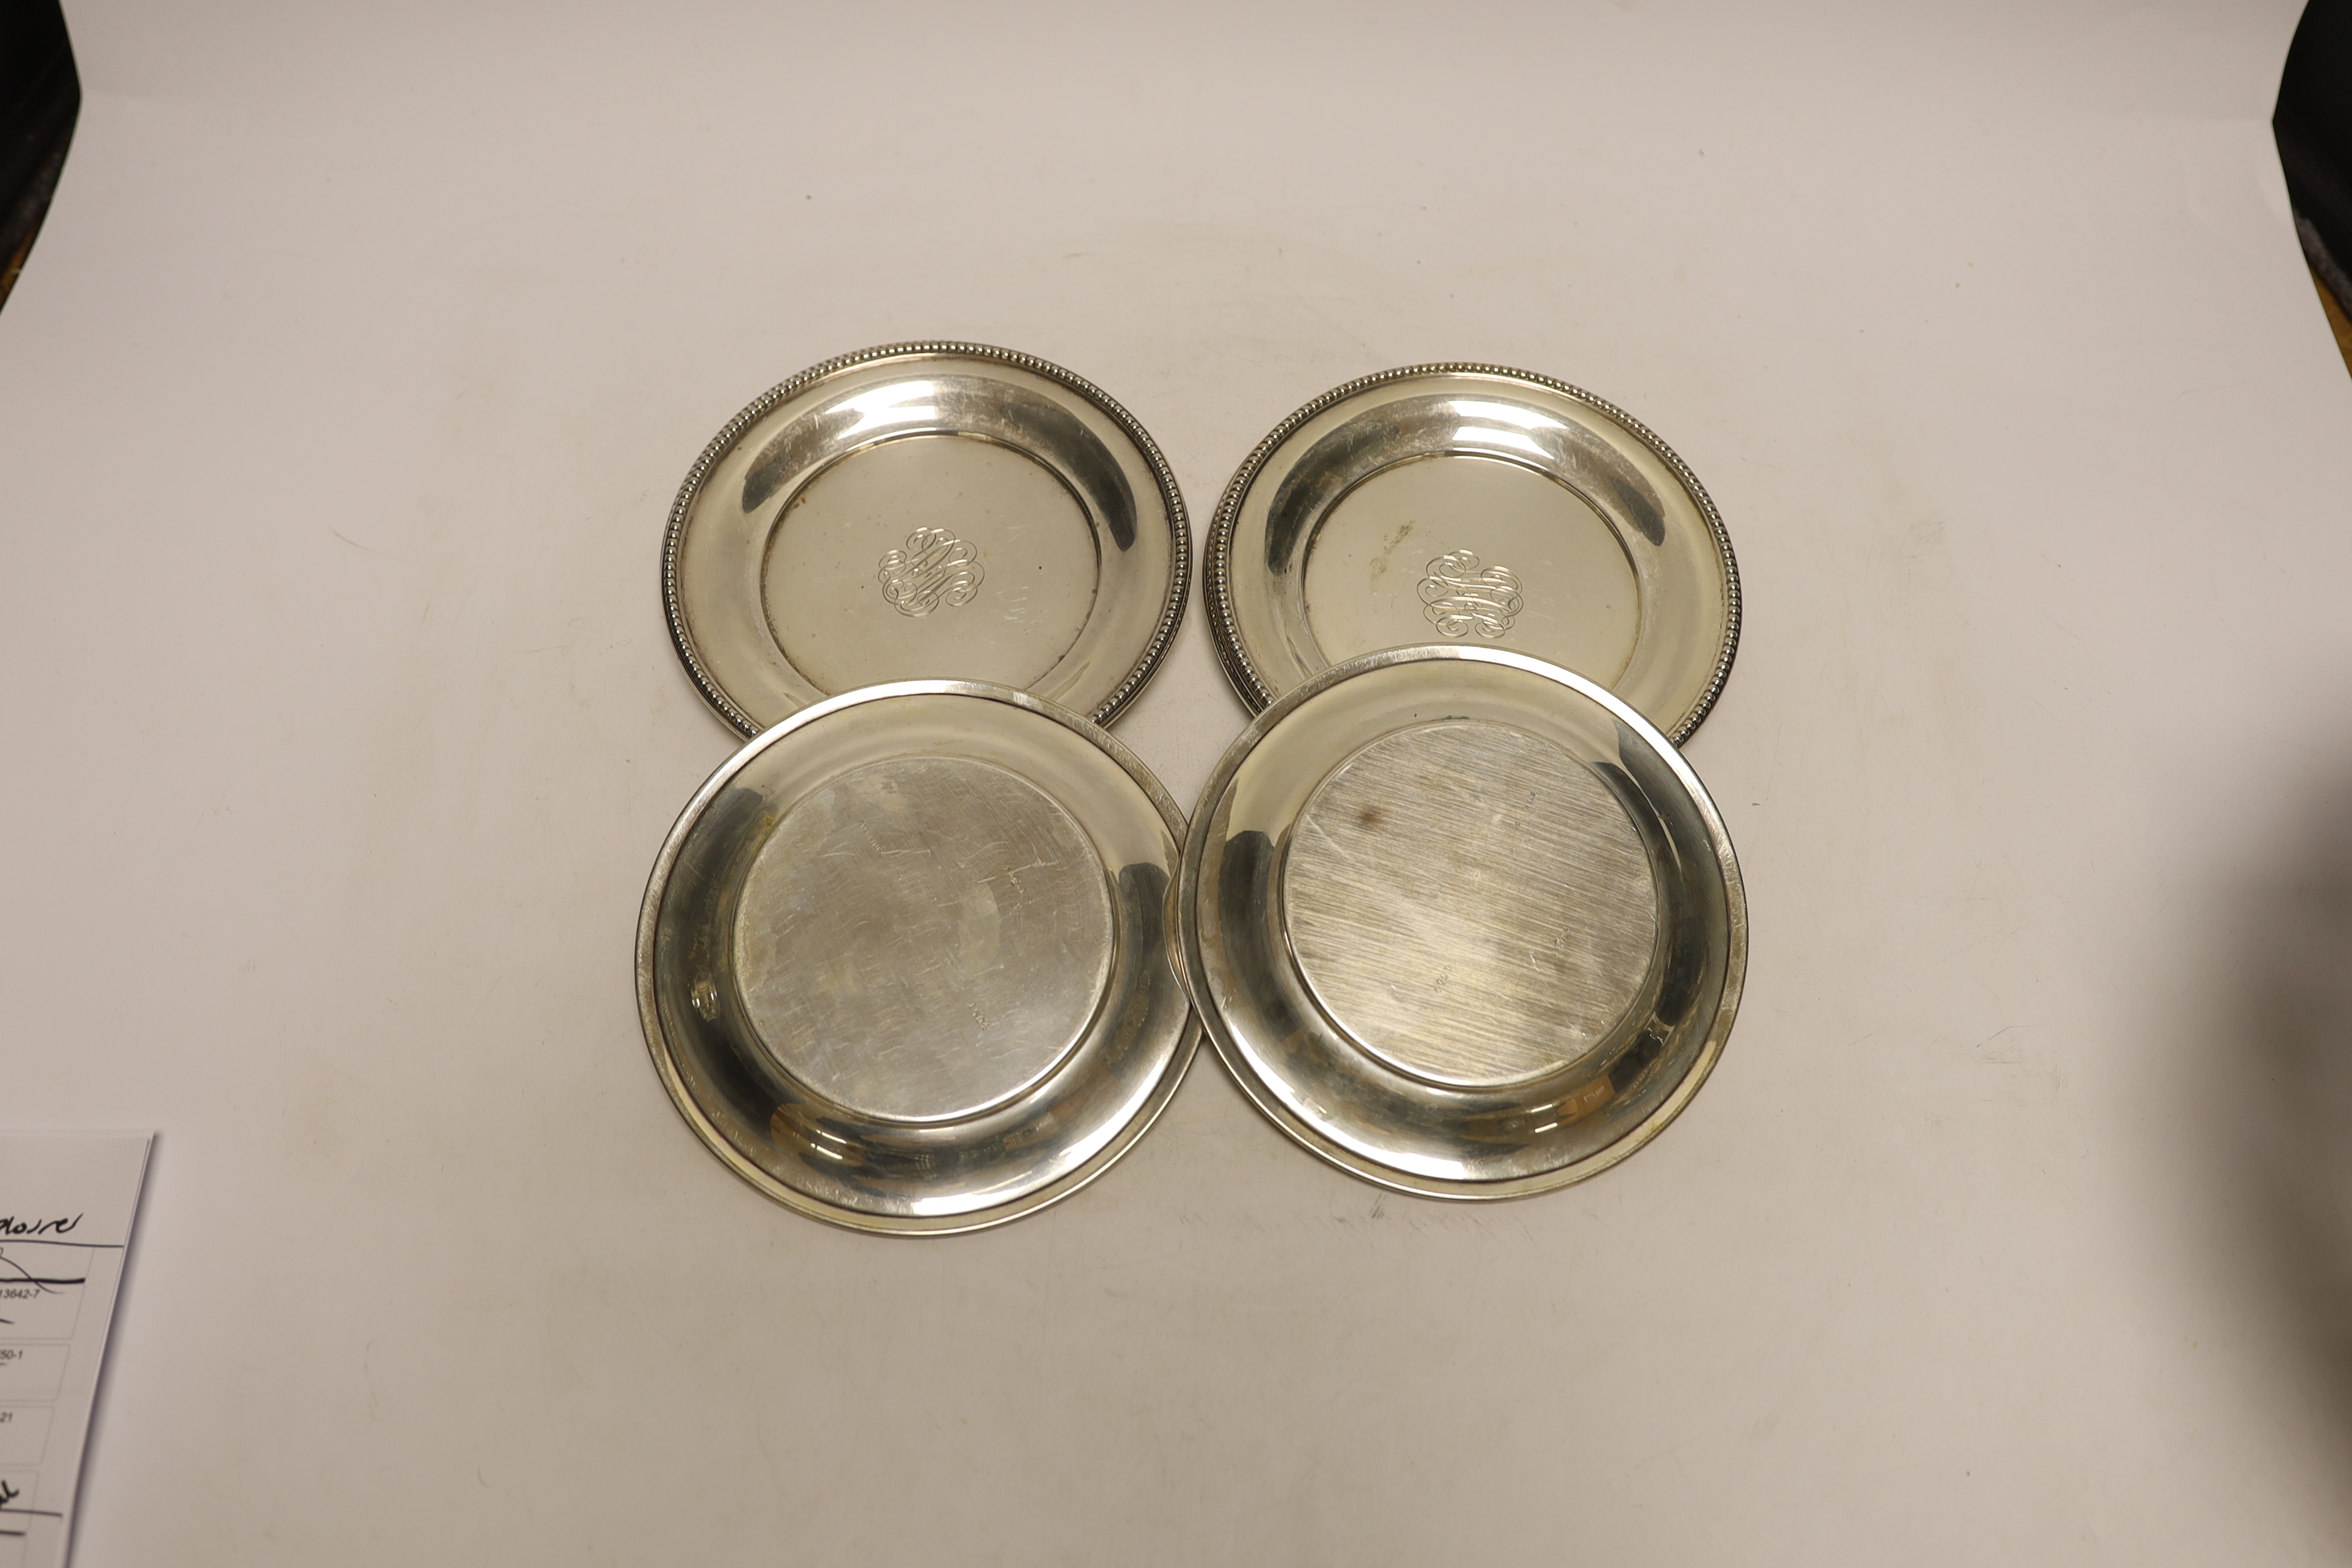 A set of six American sterling dishes, by R. Wallace & Sons, with engraved monogram and beaded borders, 15.1cm, 18.8oz.